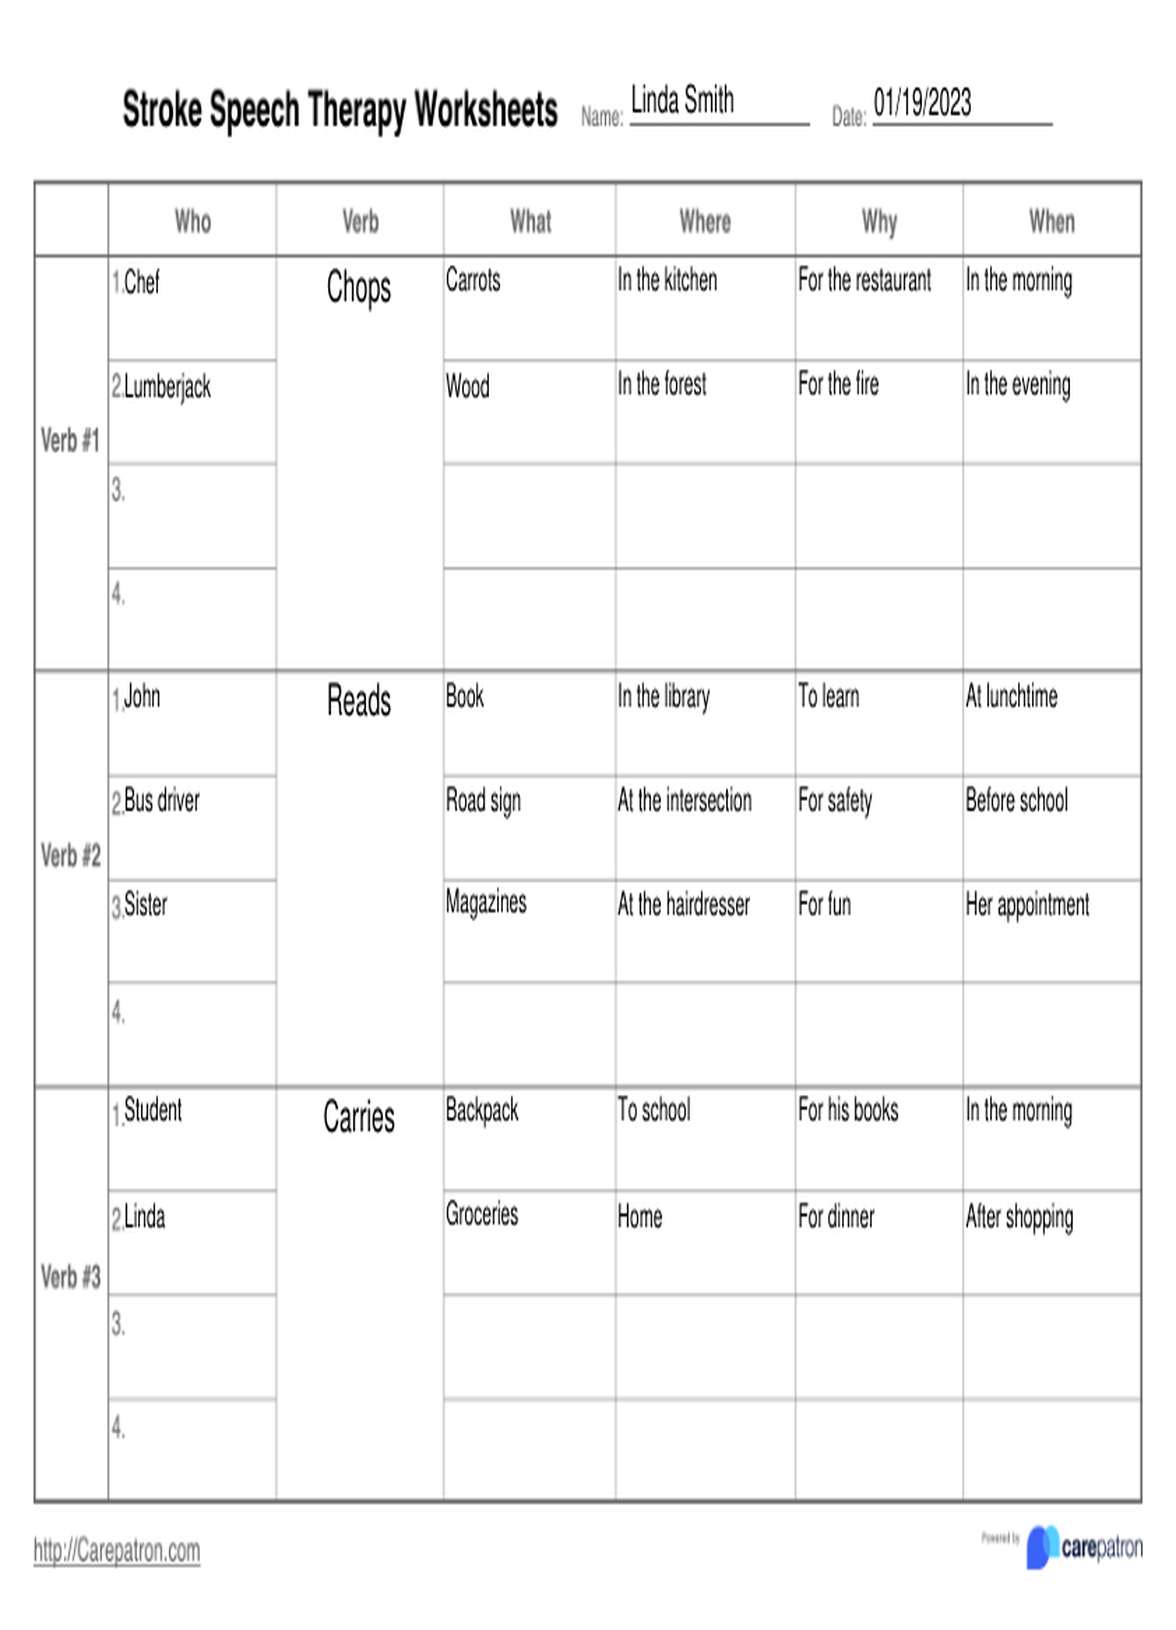 Stroke Speech Therapy Worksheets PDF Example